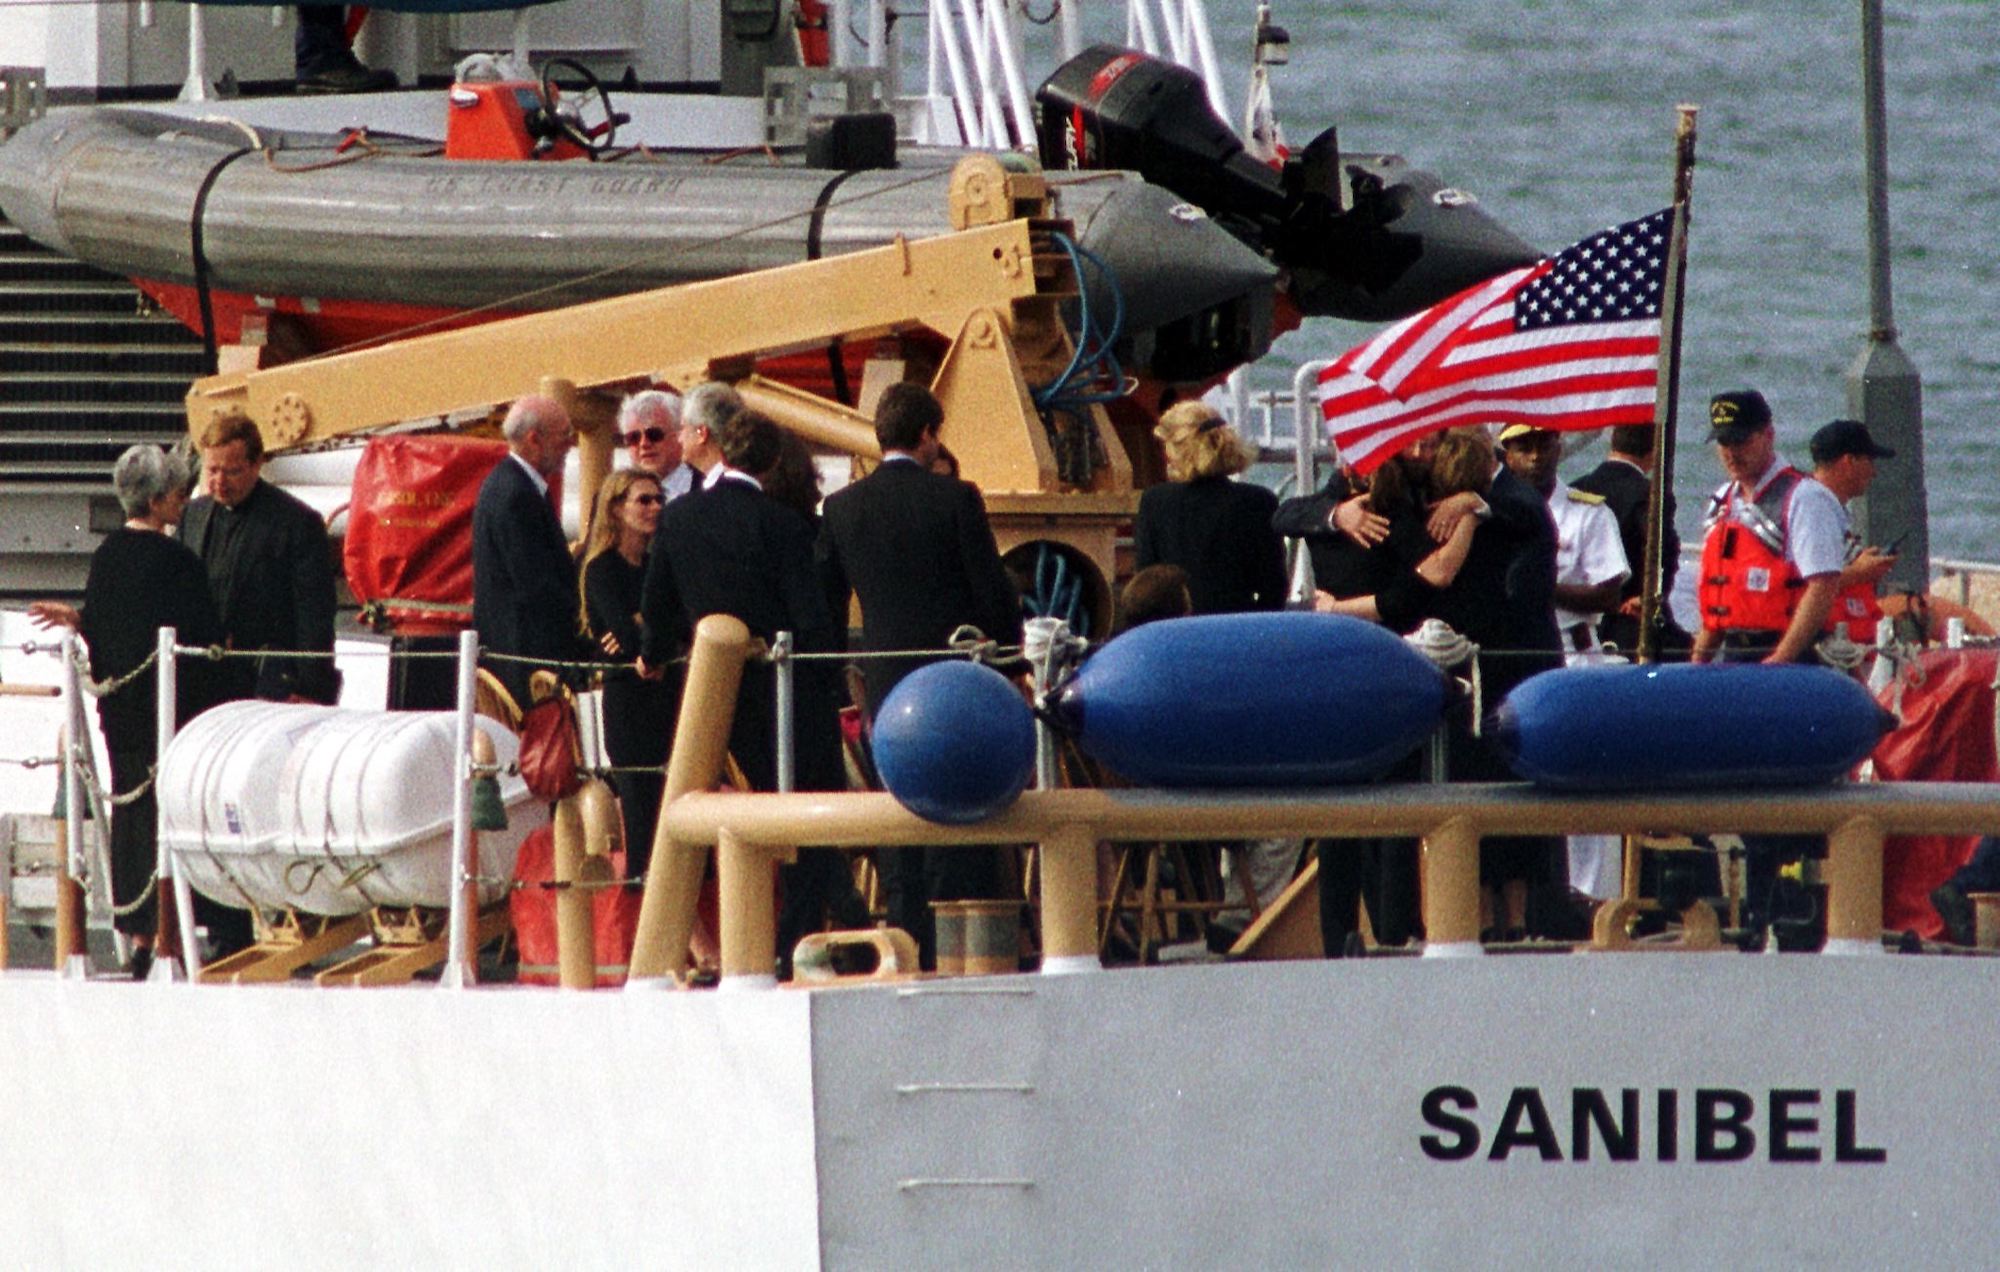 Members of the Bessette and Kennedy families gather for burial at sea of John F. Kennedy Jr., Carolyn Bessette, and Lauren Bessette